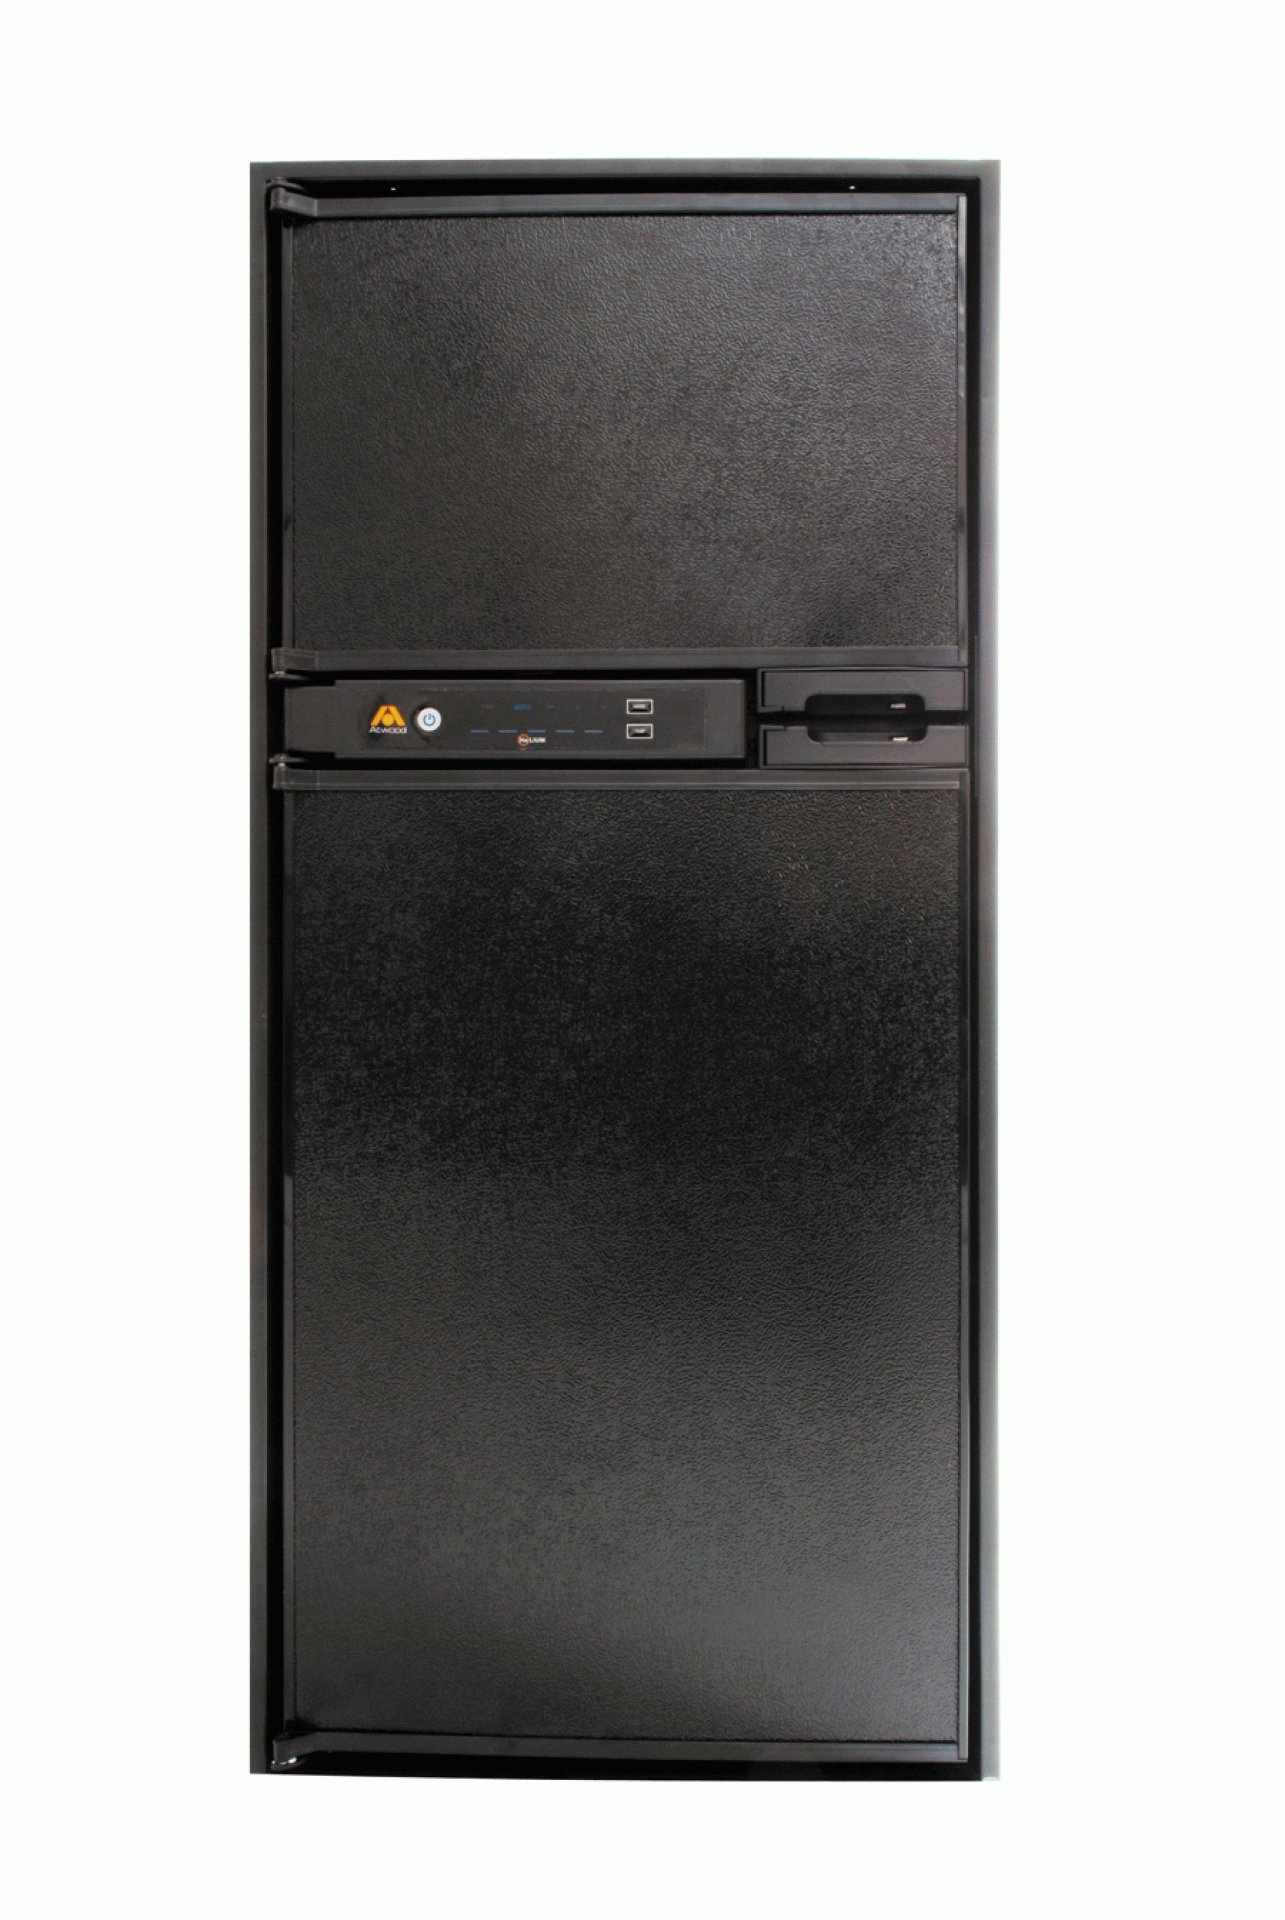 ATWOOD MOBILE PRODUCTS LLC | 14062 | PANEL 6 CU FT REFRIGERATOR BOTTOM DOOR